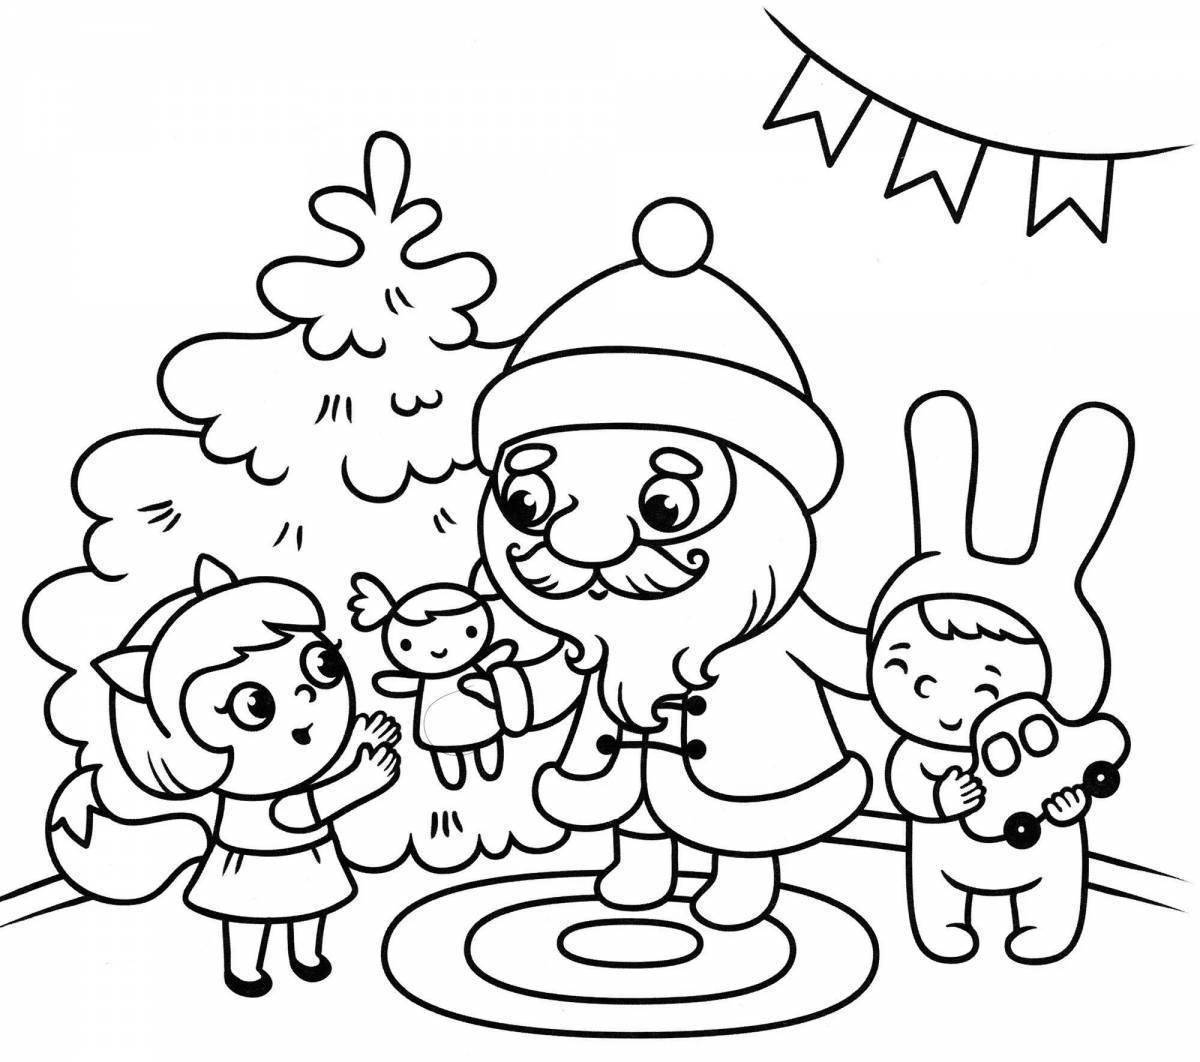 Christmas coloring book #1